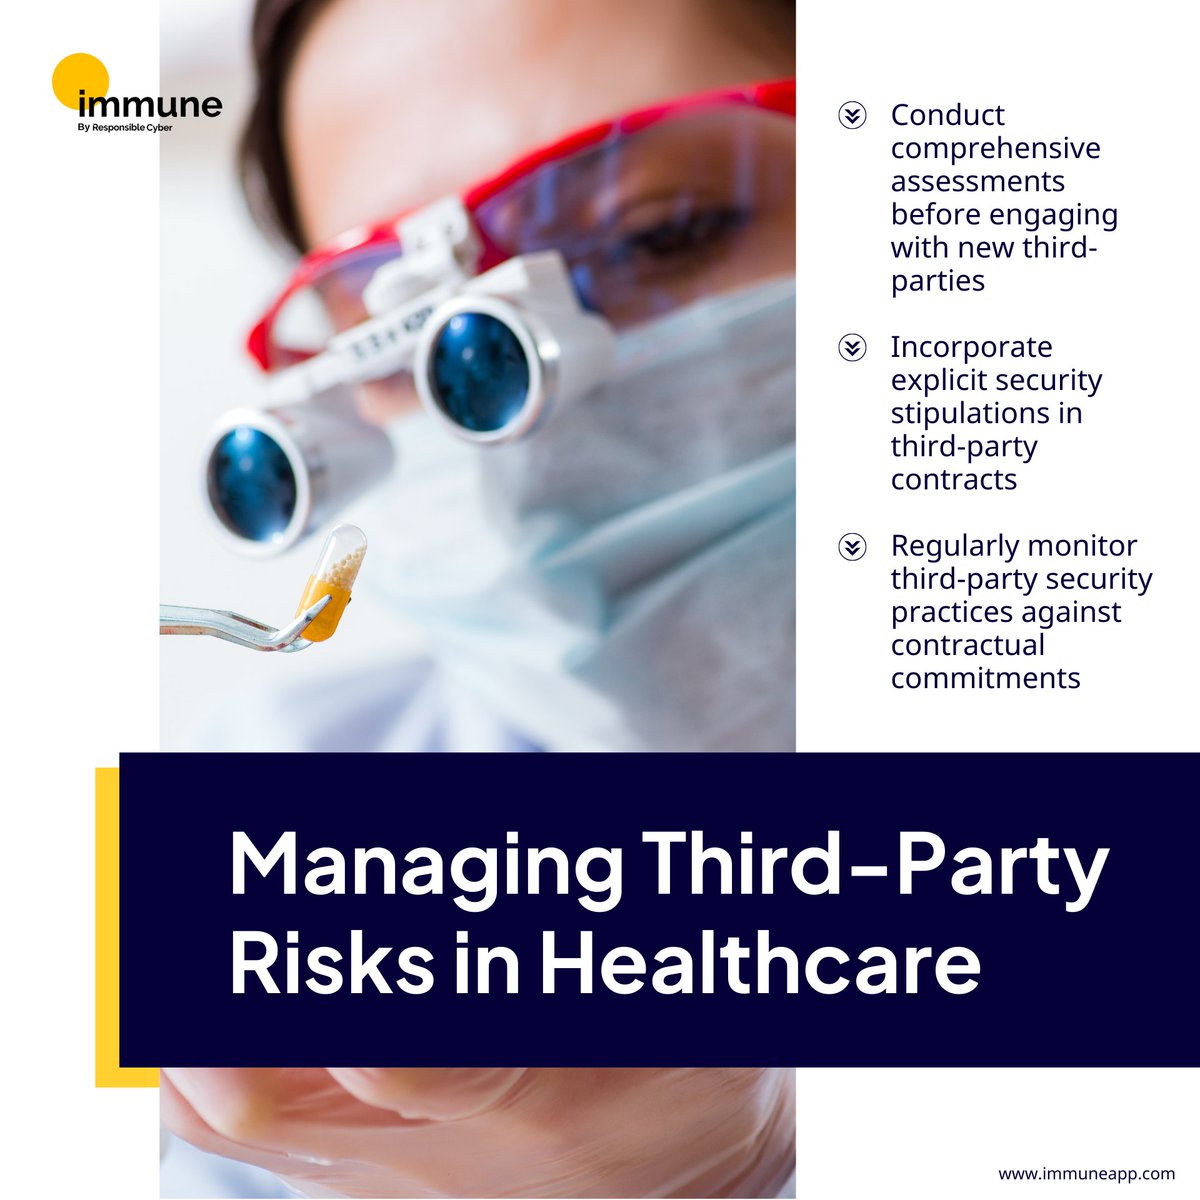 Relying heavily on an extensive network of third-party services and products such as pharmaceutical suppliers, biomedical device manufacturers, IT infrastructure providers and beyond, the #healthcare industry is particularly vulnerable to disruptions. #TPRM